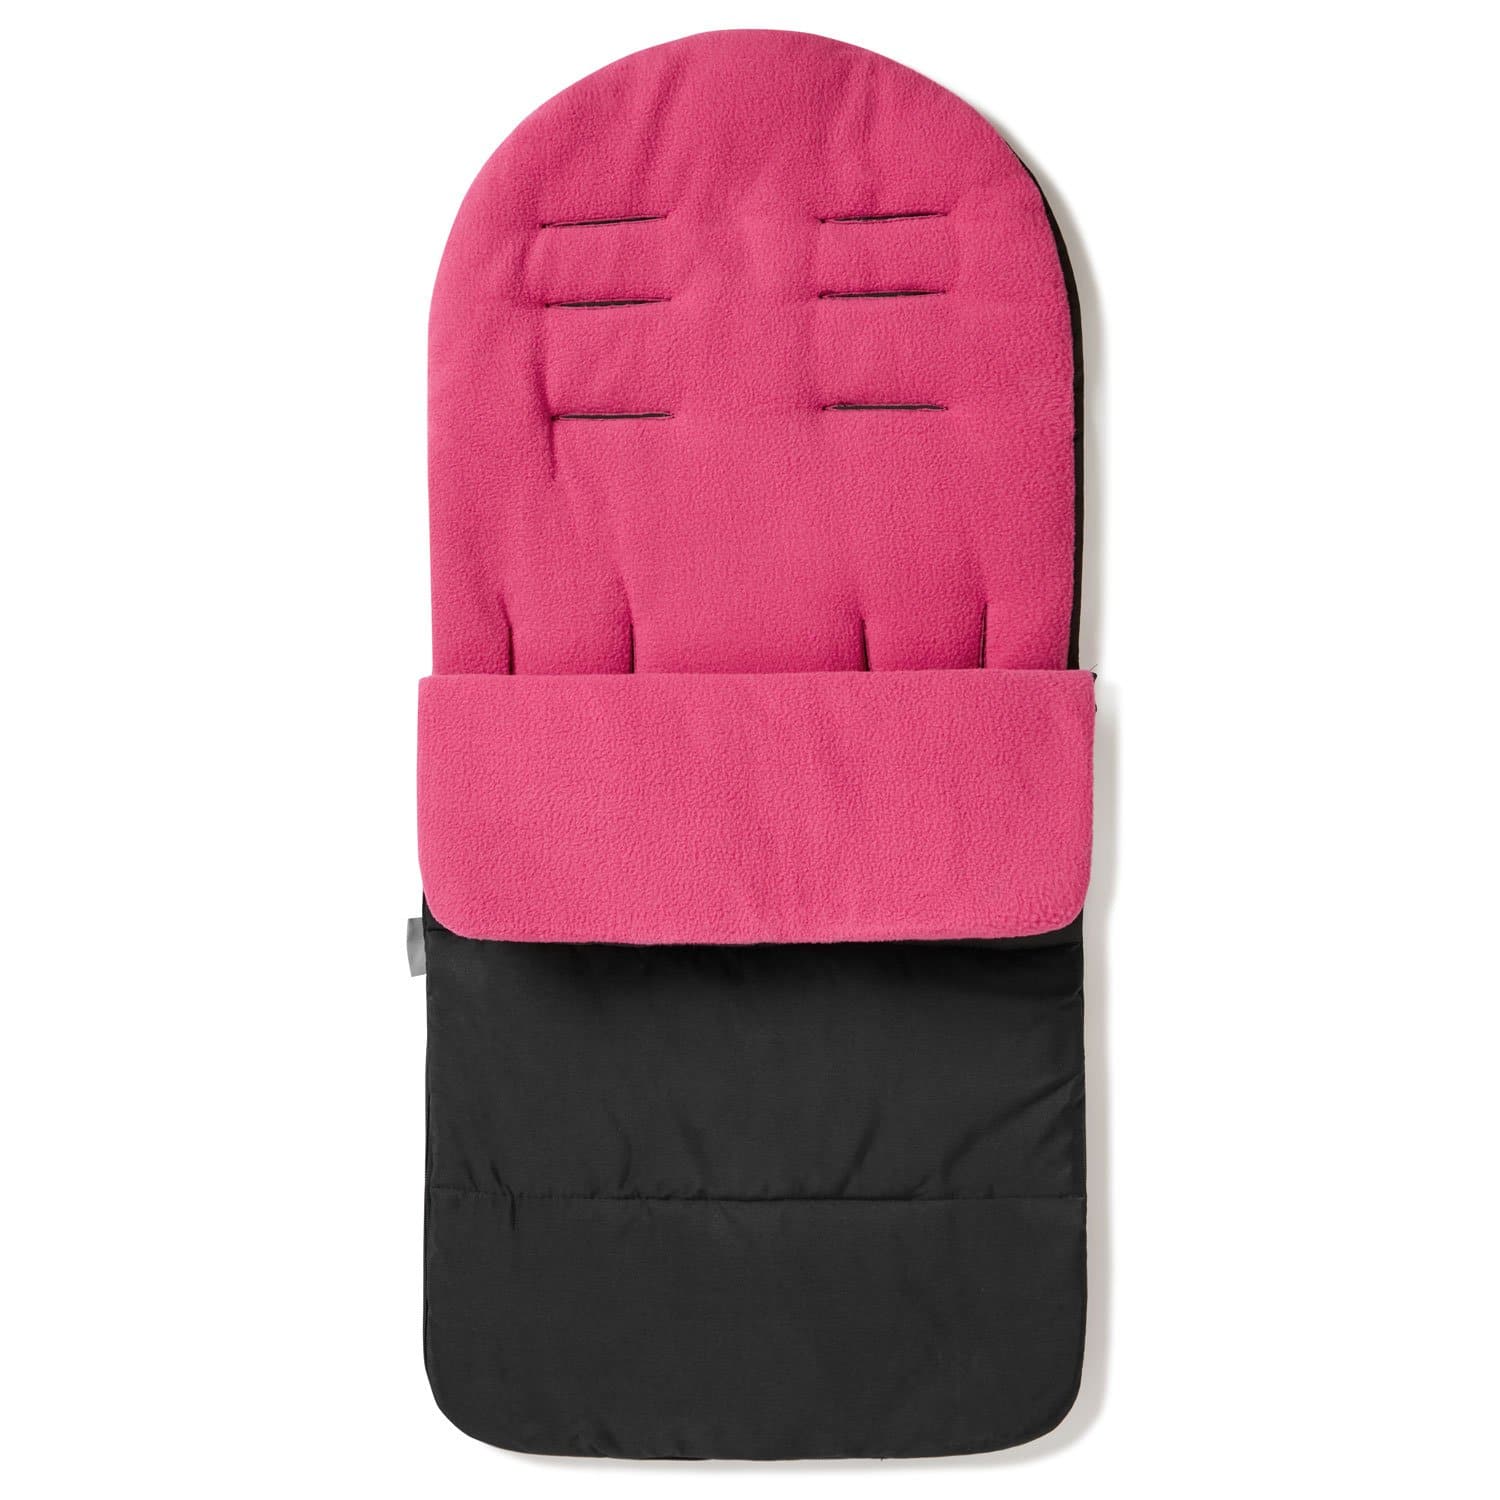 Premium Footmuff / Cosy Toes Compatible with Mountain Buggy - Pink Rose / Fits All Models | For Your Little One